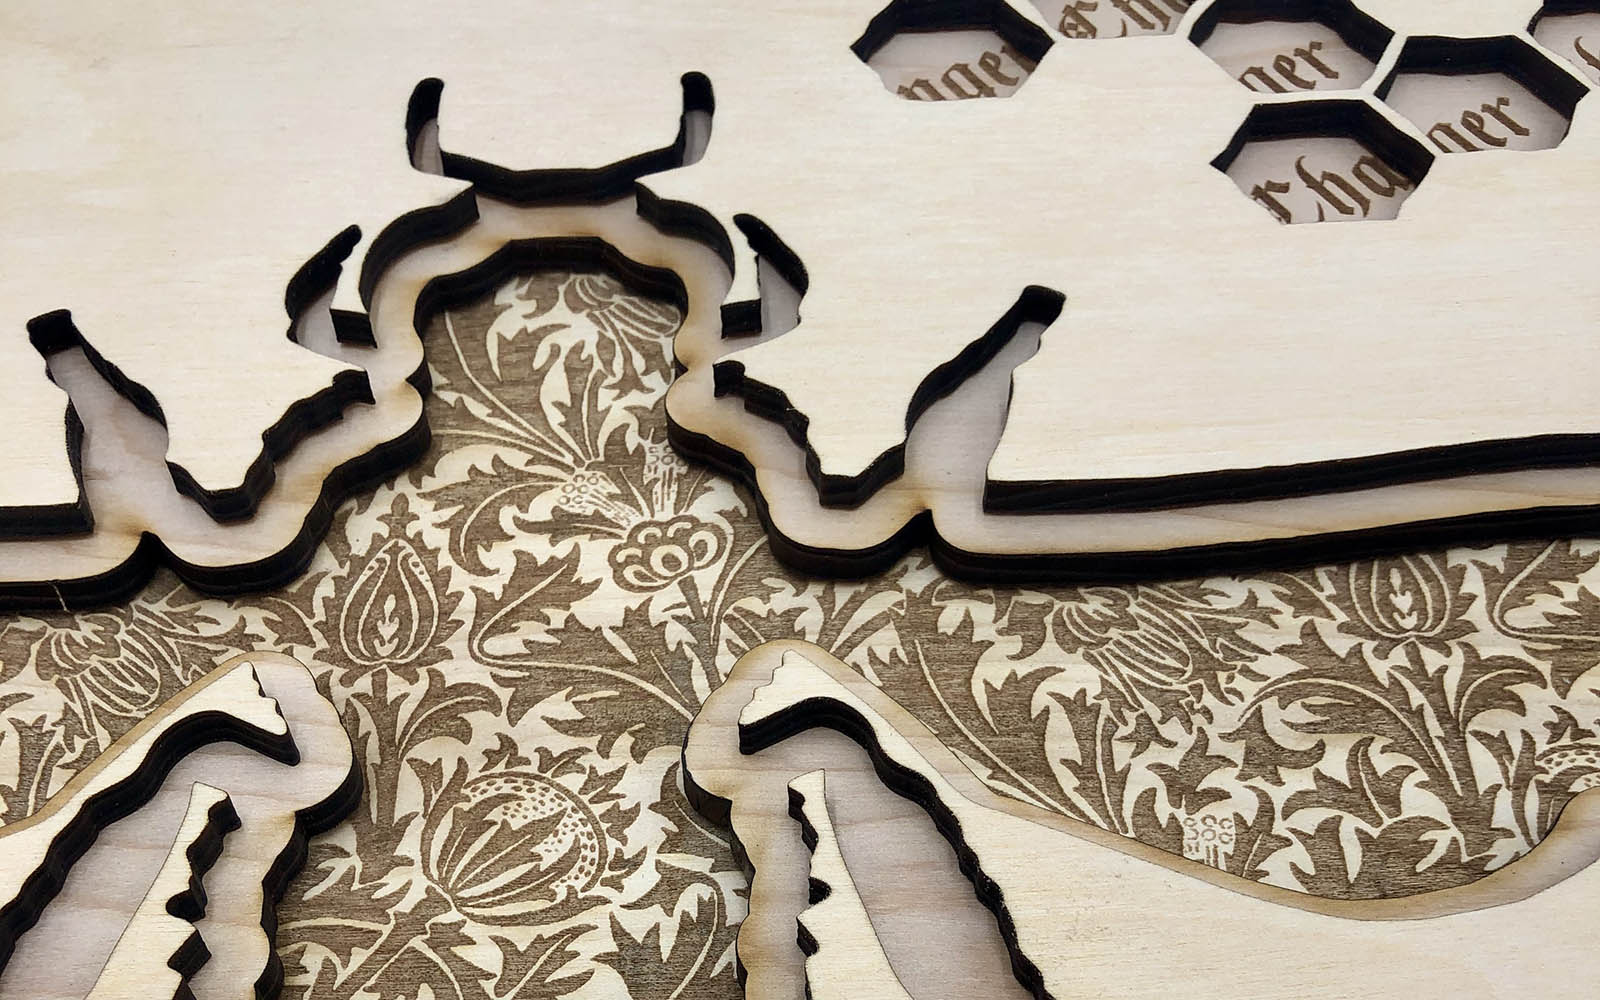 Bee - One of several Laser cut and engraved Realm of the Elderling fan art art pieces.